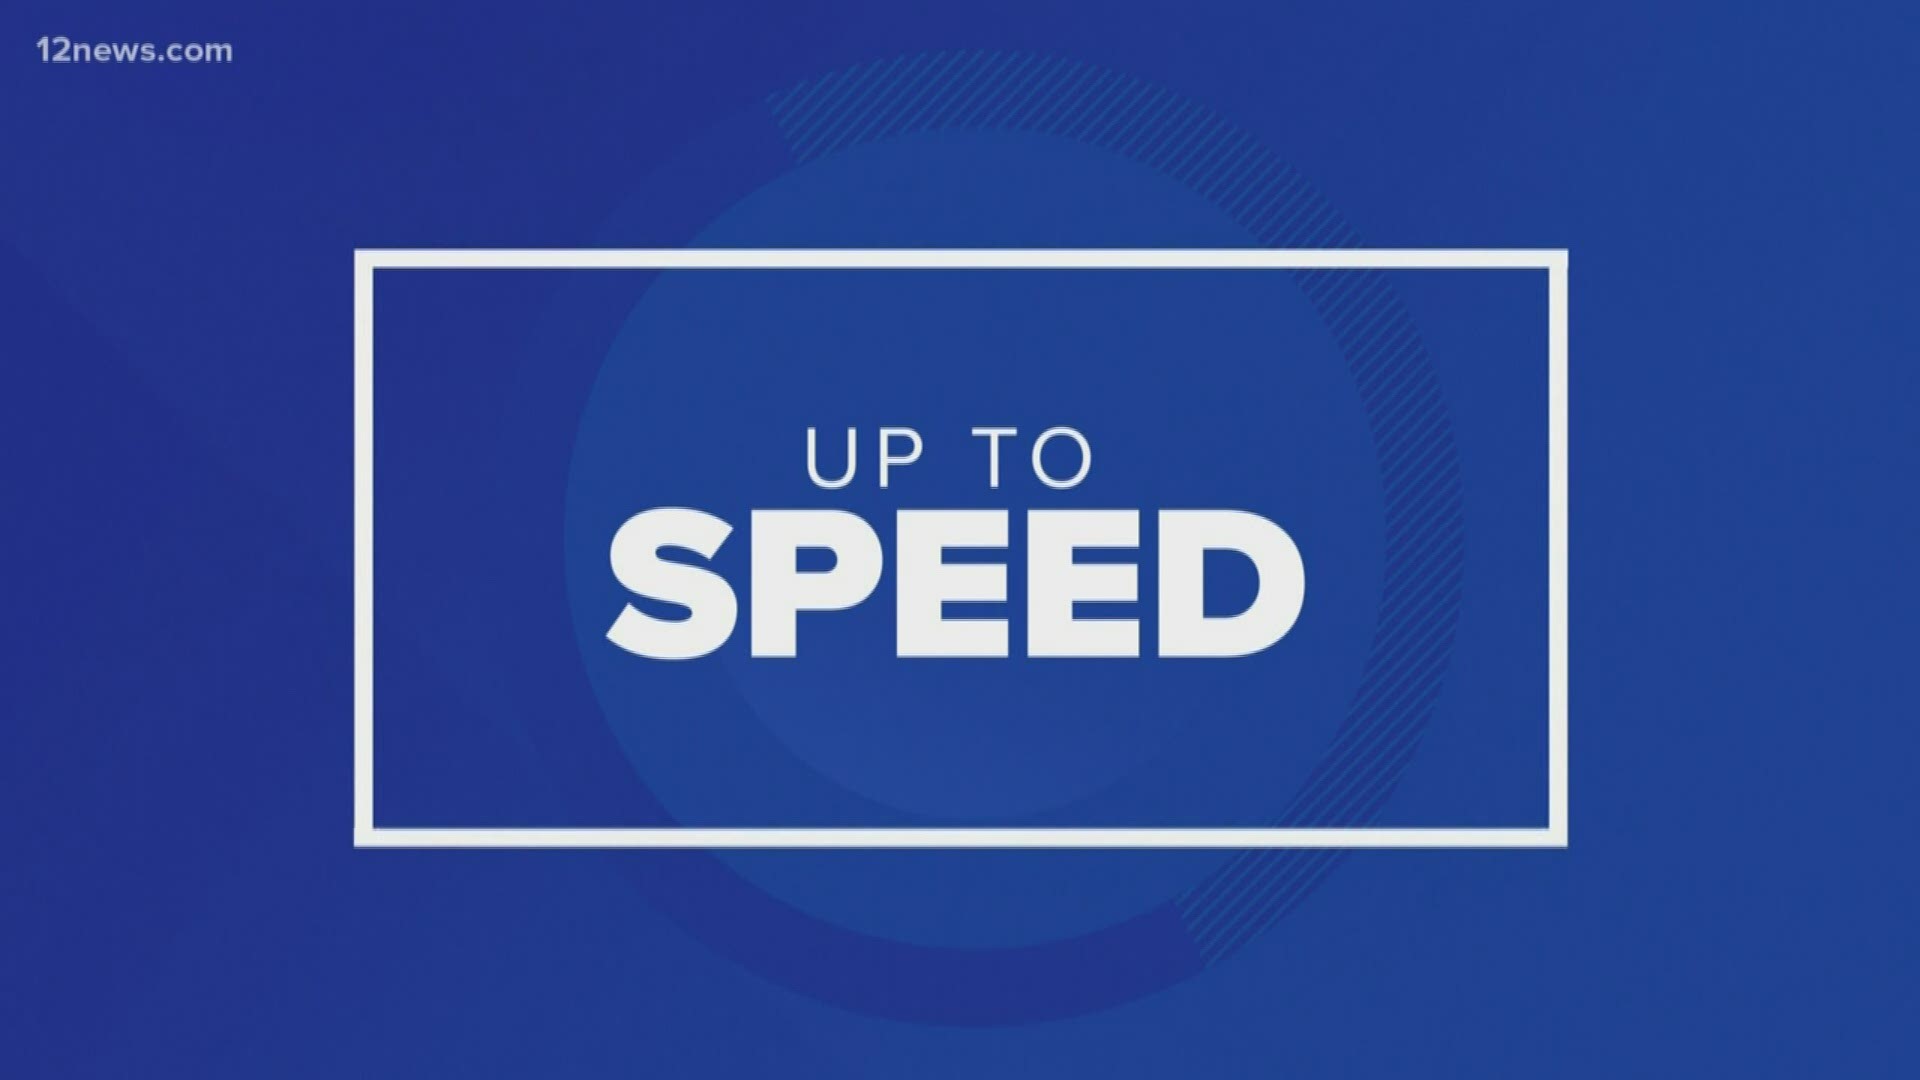 Get "Up to Speed" on the latest news happening around the Valley and across the nation on Wednesday evening.